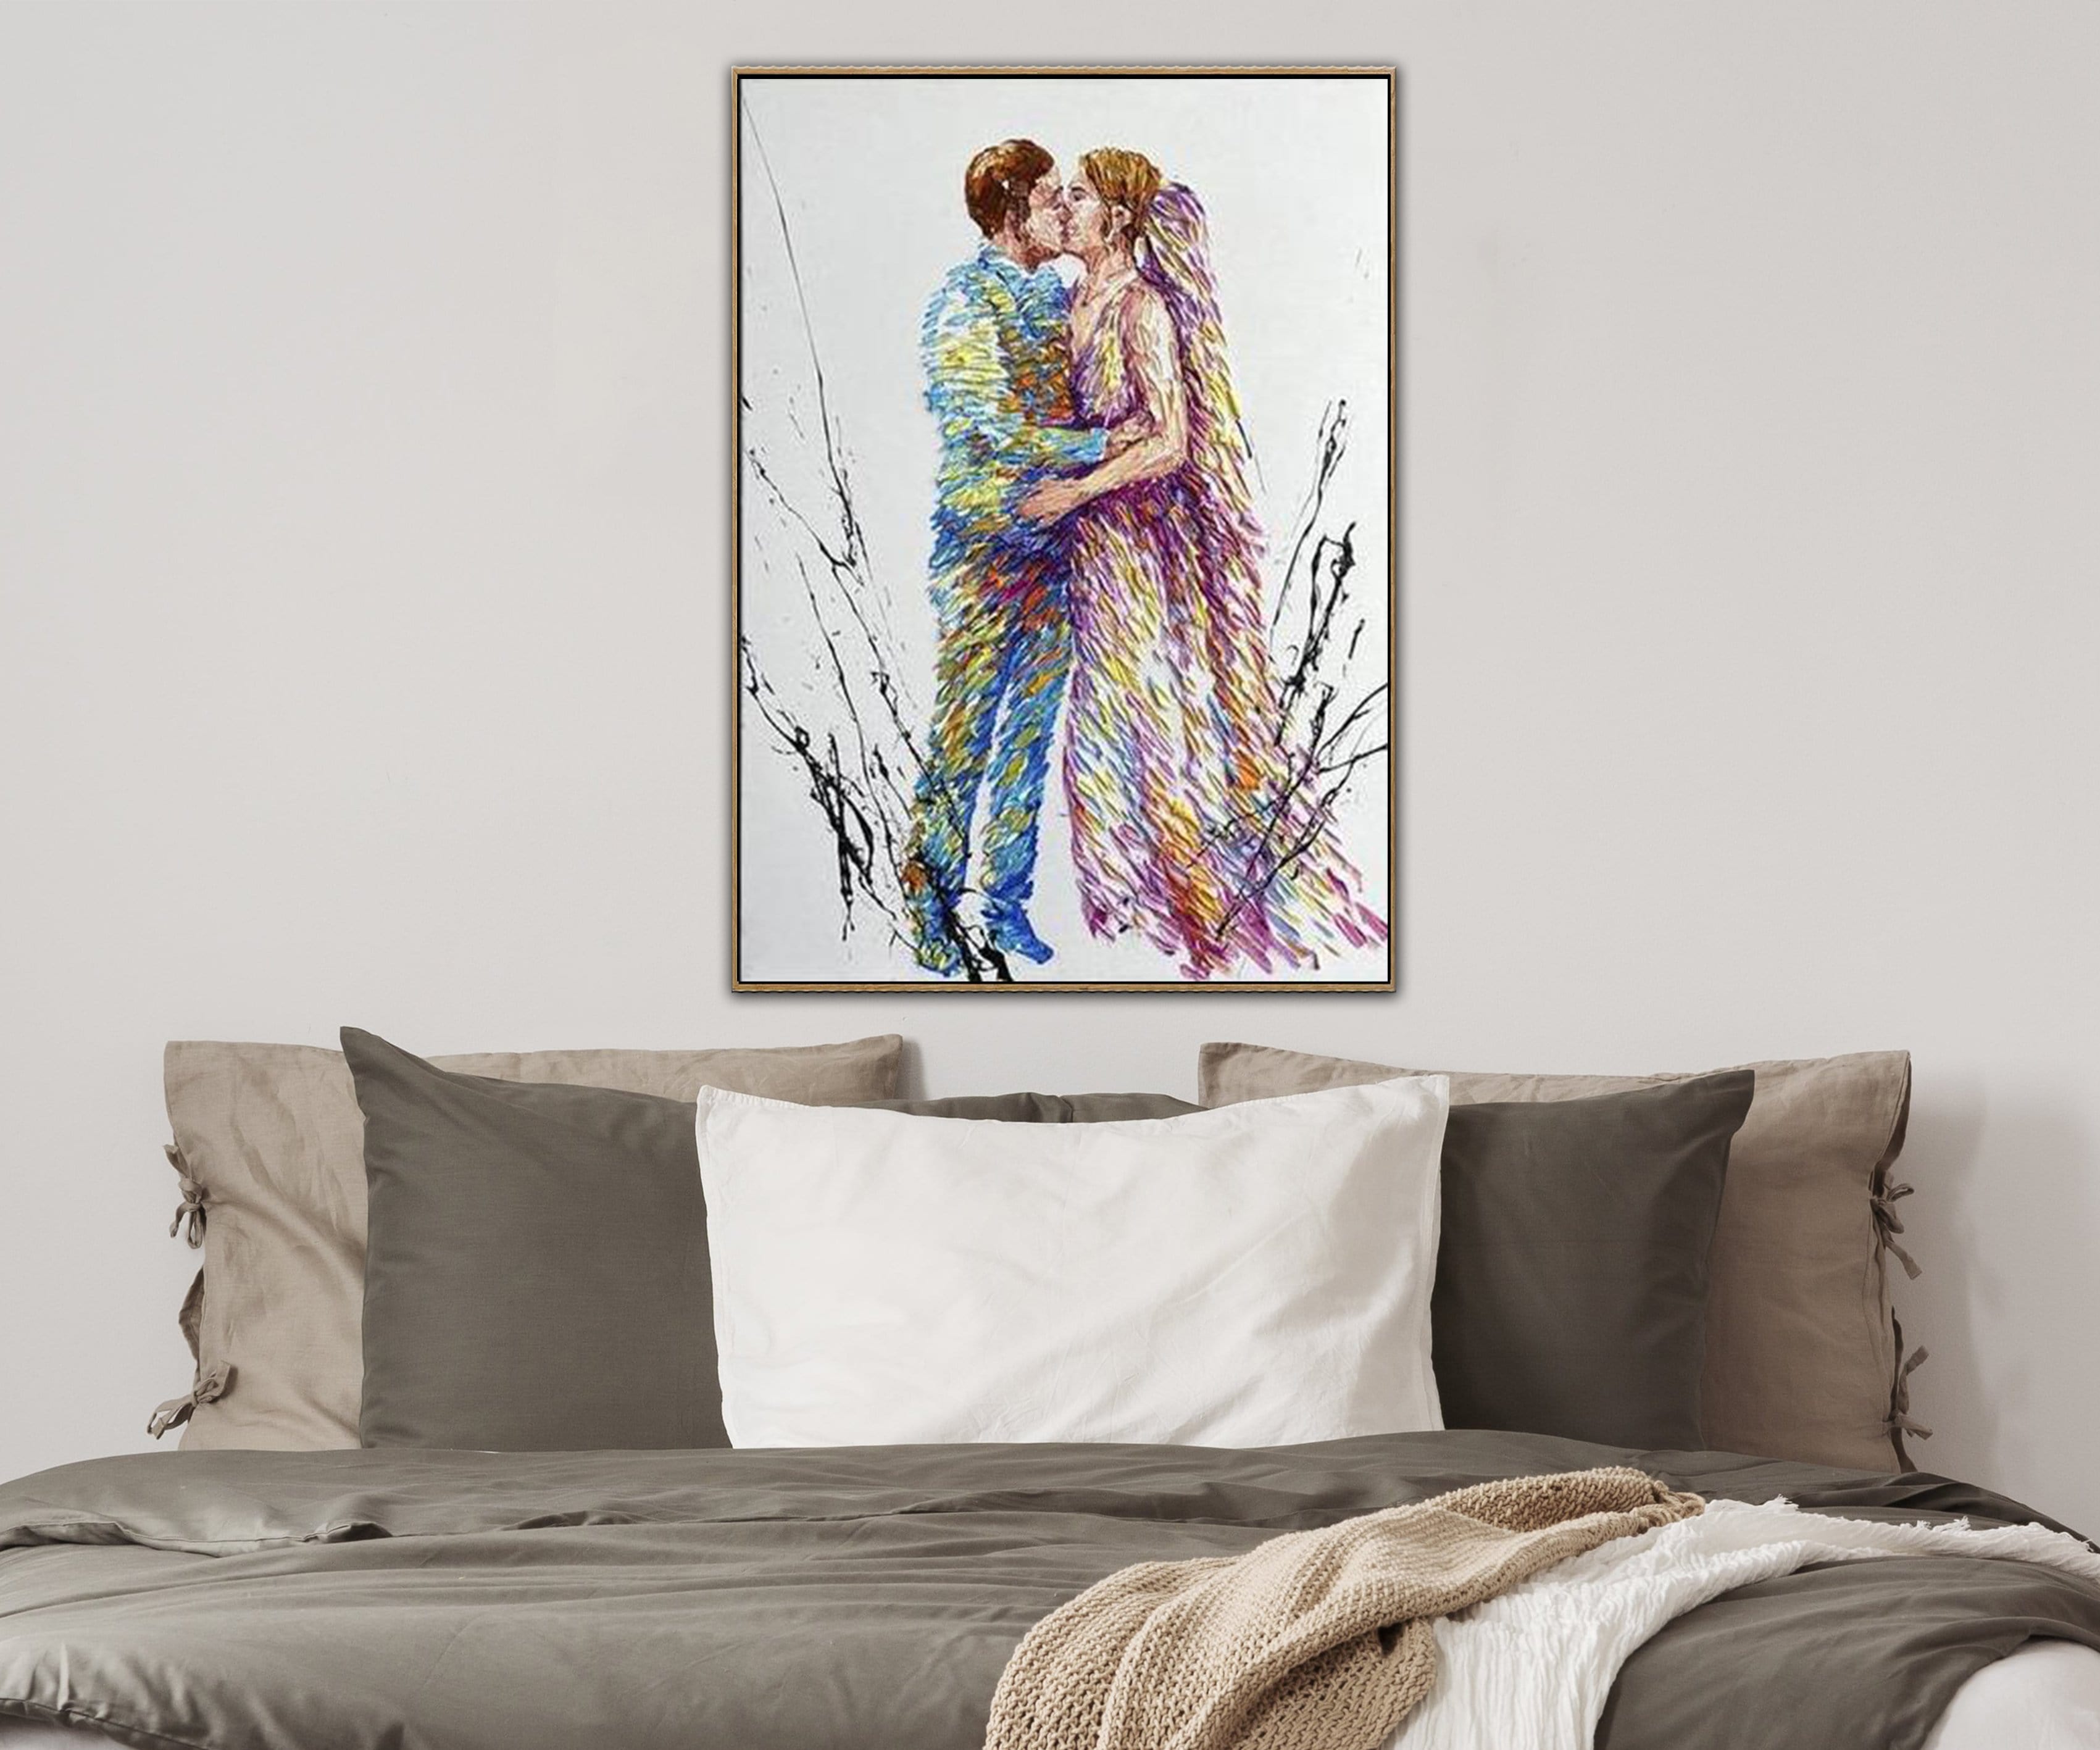 WEDDING KISS from $310